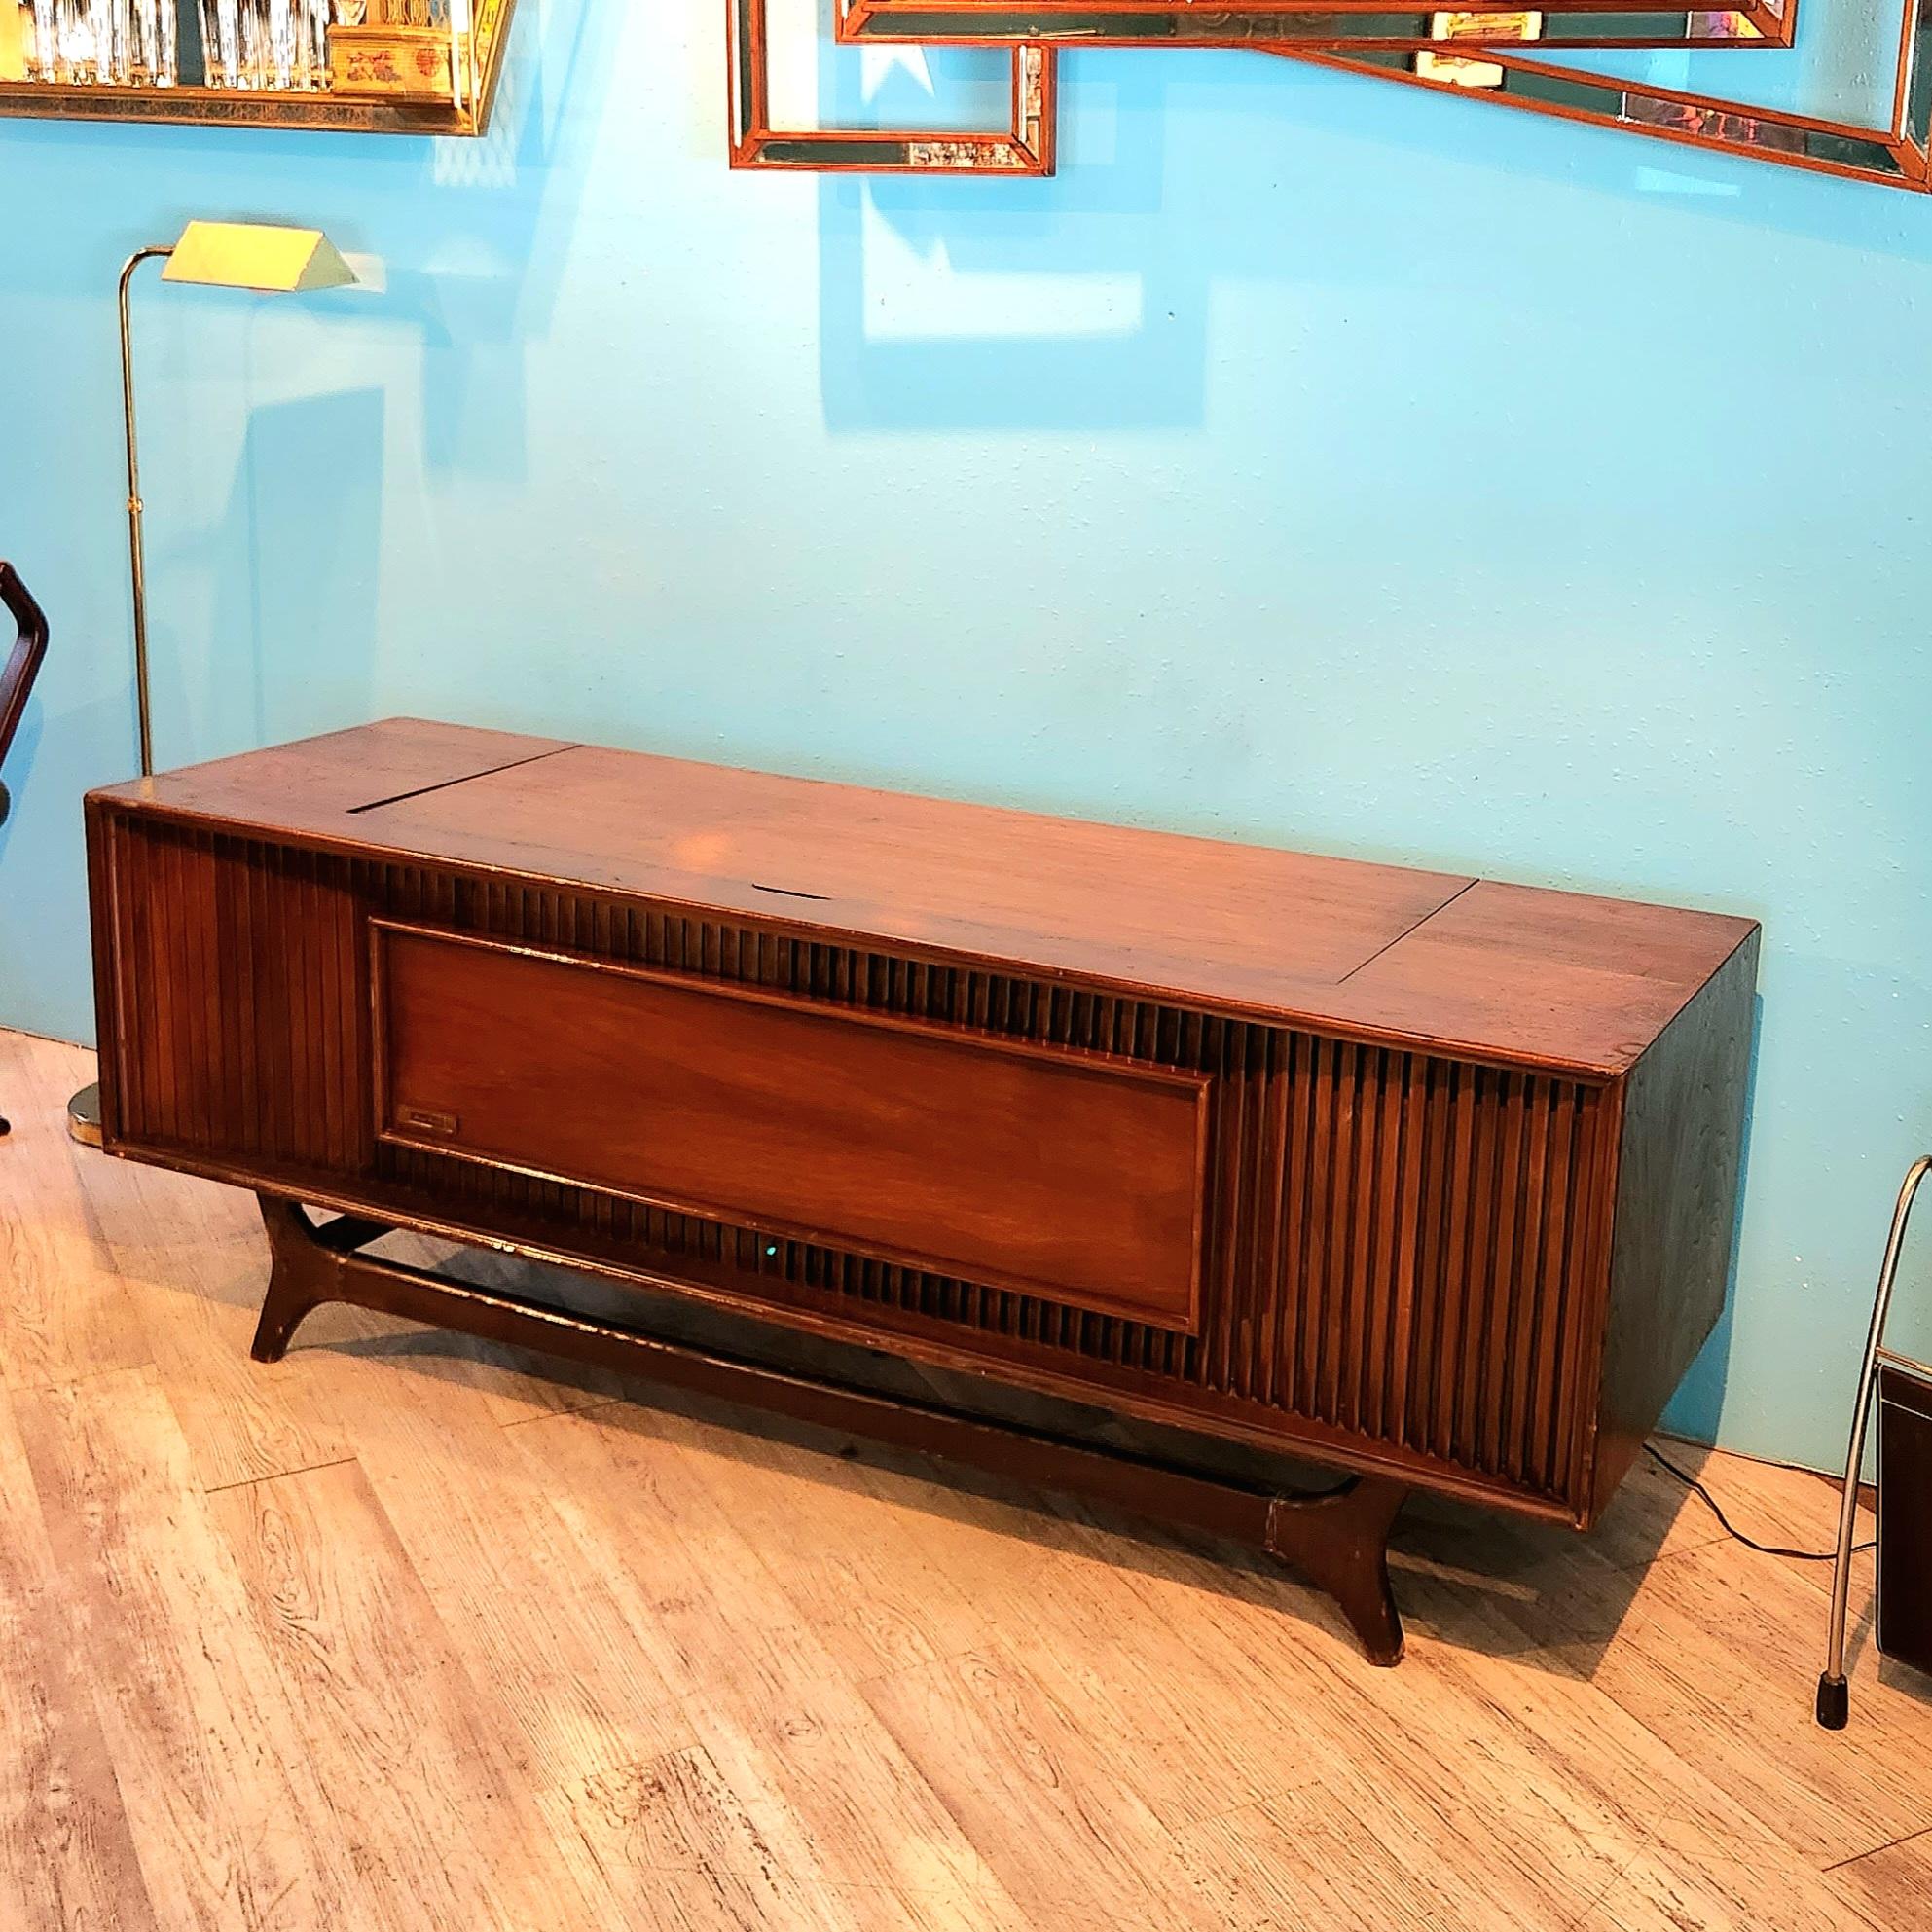 Thanks for looking at this refurbished, fully functioning mid-century stereo console.

This is a cherished and much respected GE Wood Slats and Flat face cabinet. We call the this the Frankie, as in Frank Sinatra, the Chairman of the Board, as it